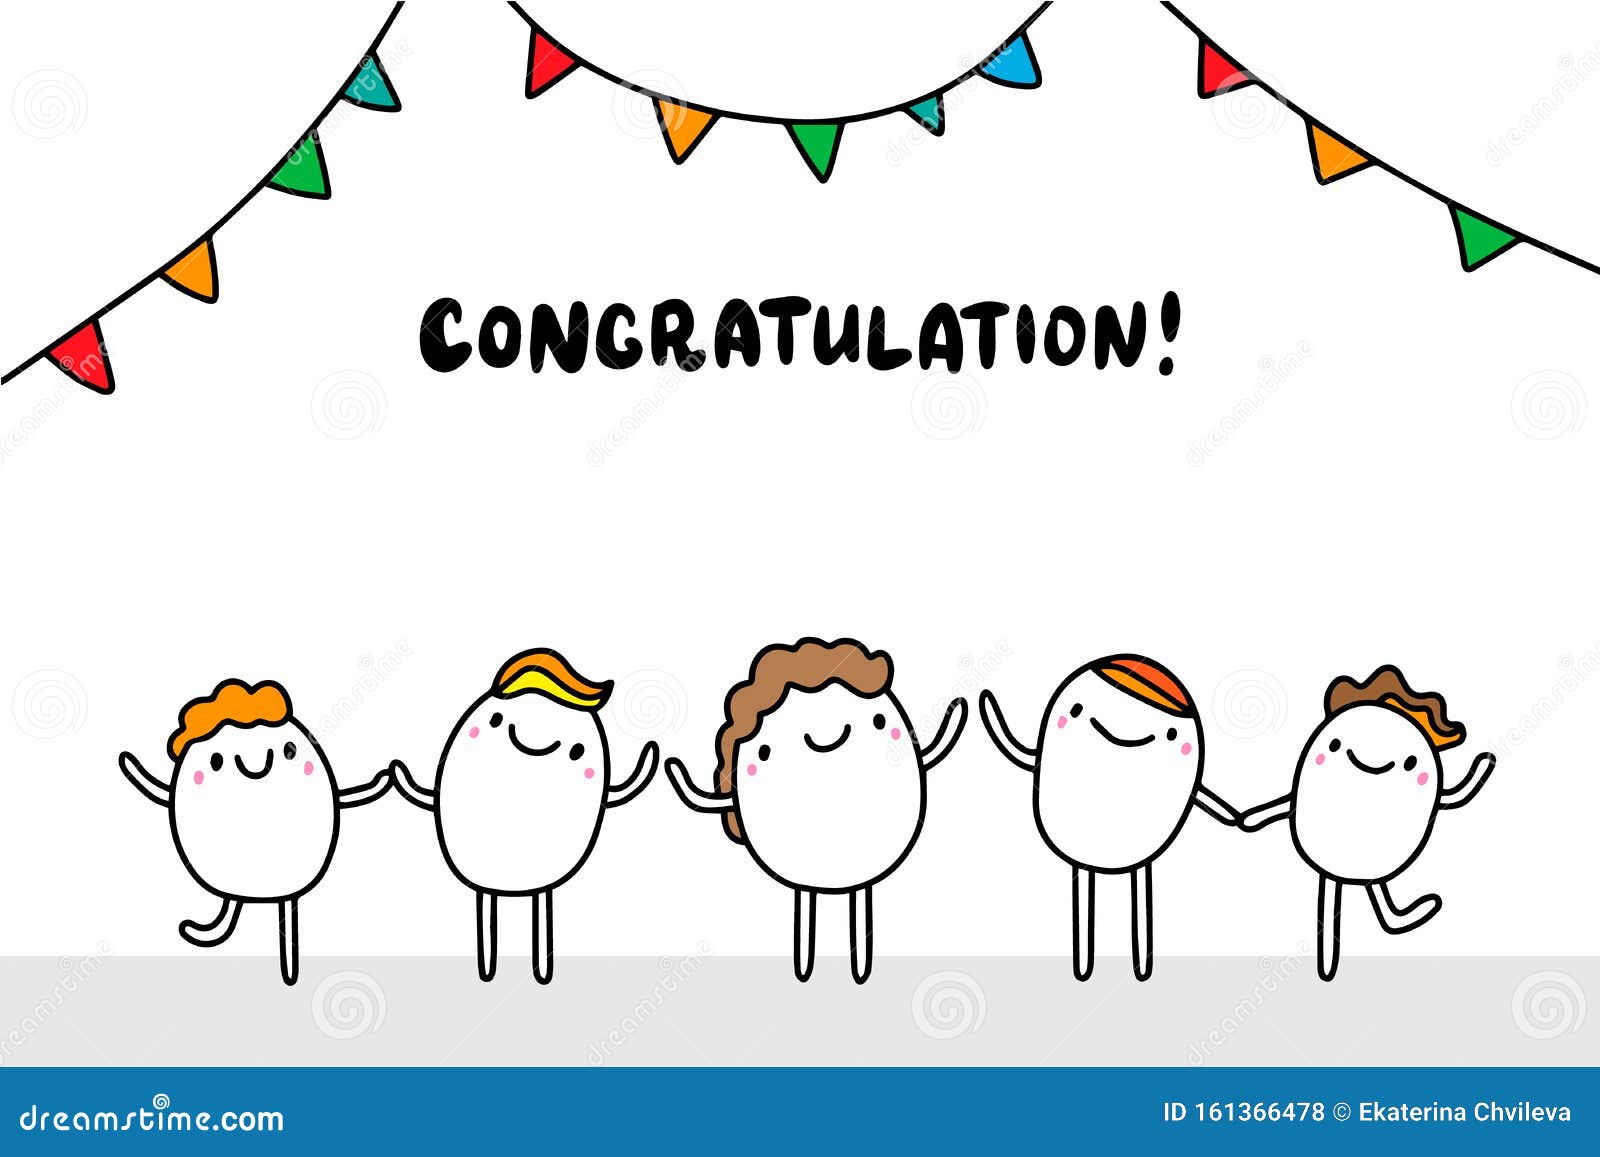 Congratulations Hand Drawn Vector Illustration with Happy Cartoon Comic  People Celebrating Stock Illustration - Illustration of graphic, banner:  161366478